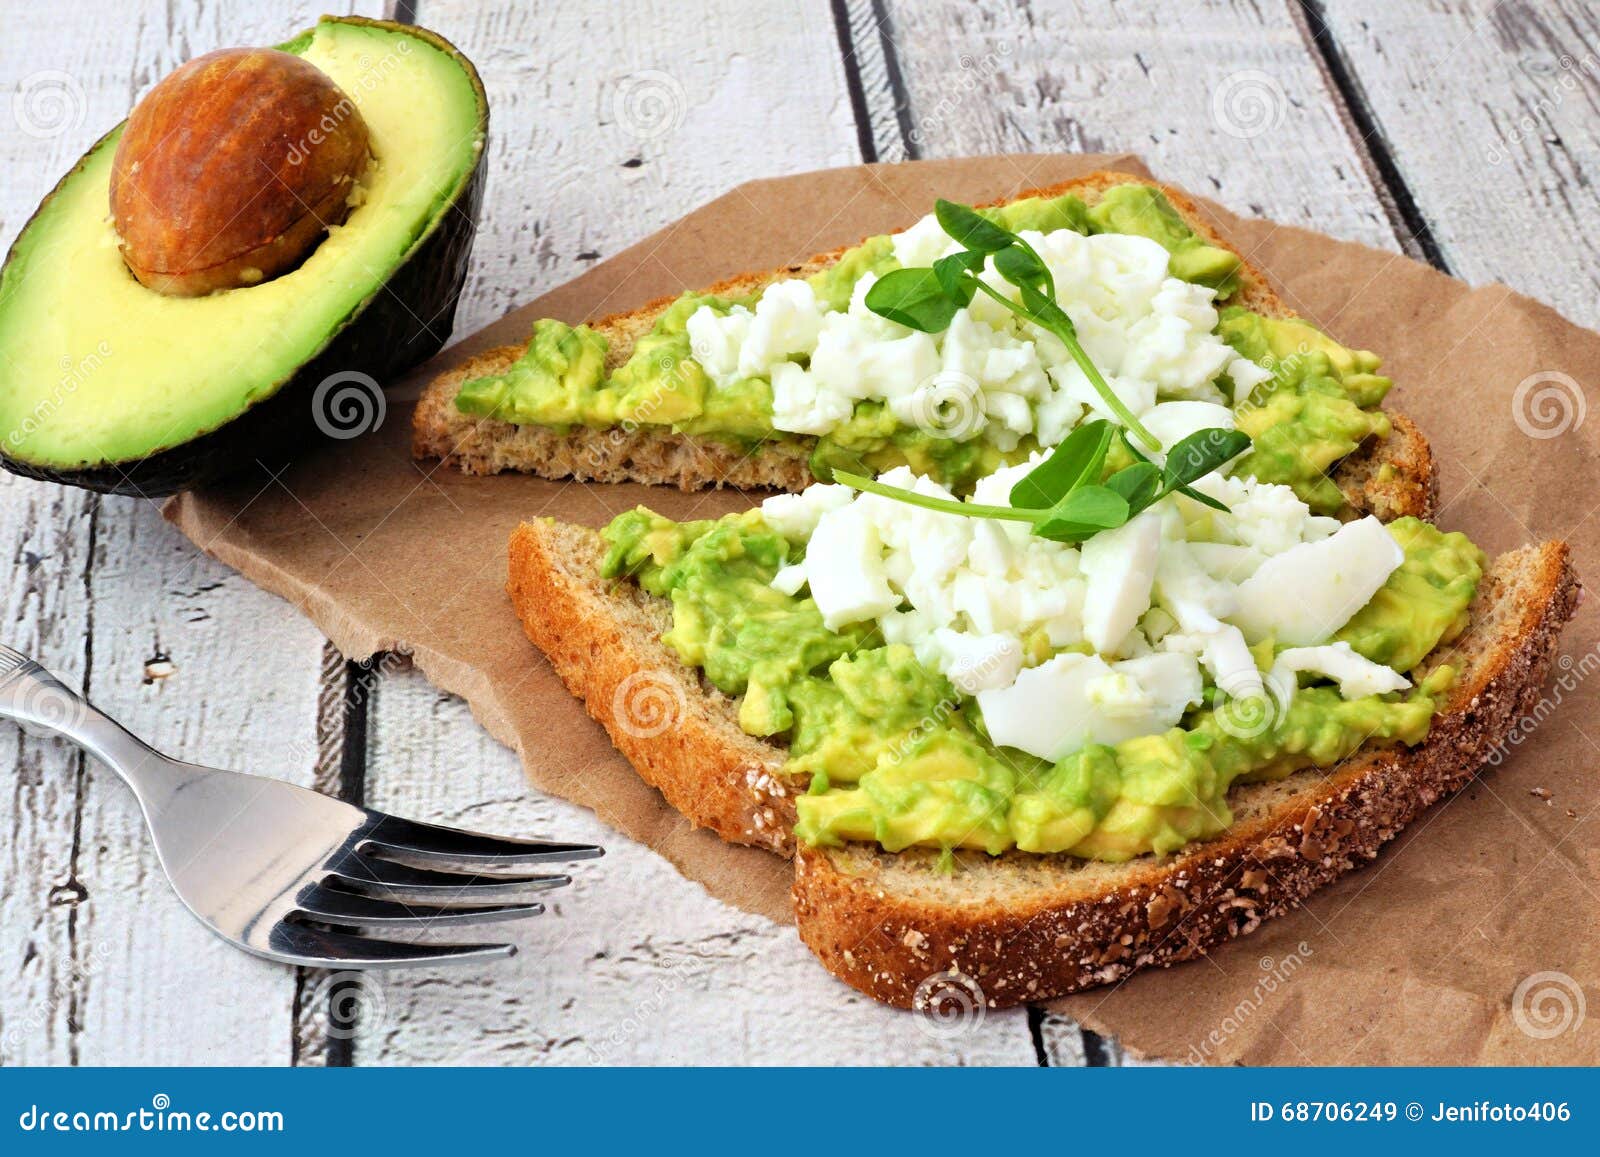 avocado toast with egg whites and pea shoots